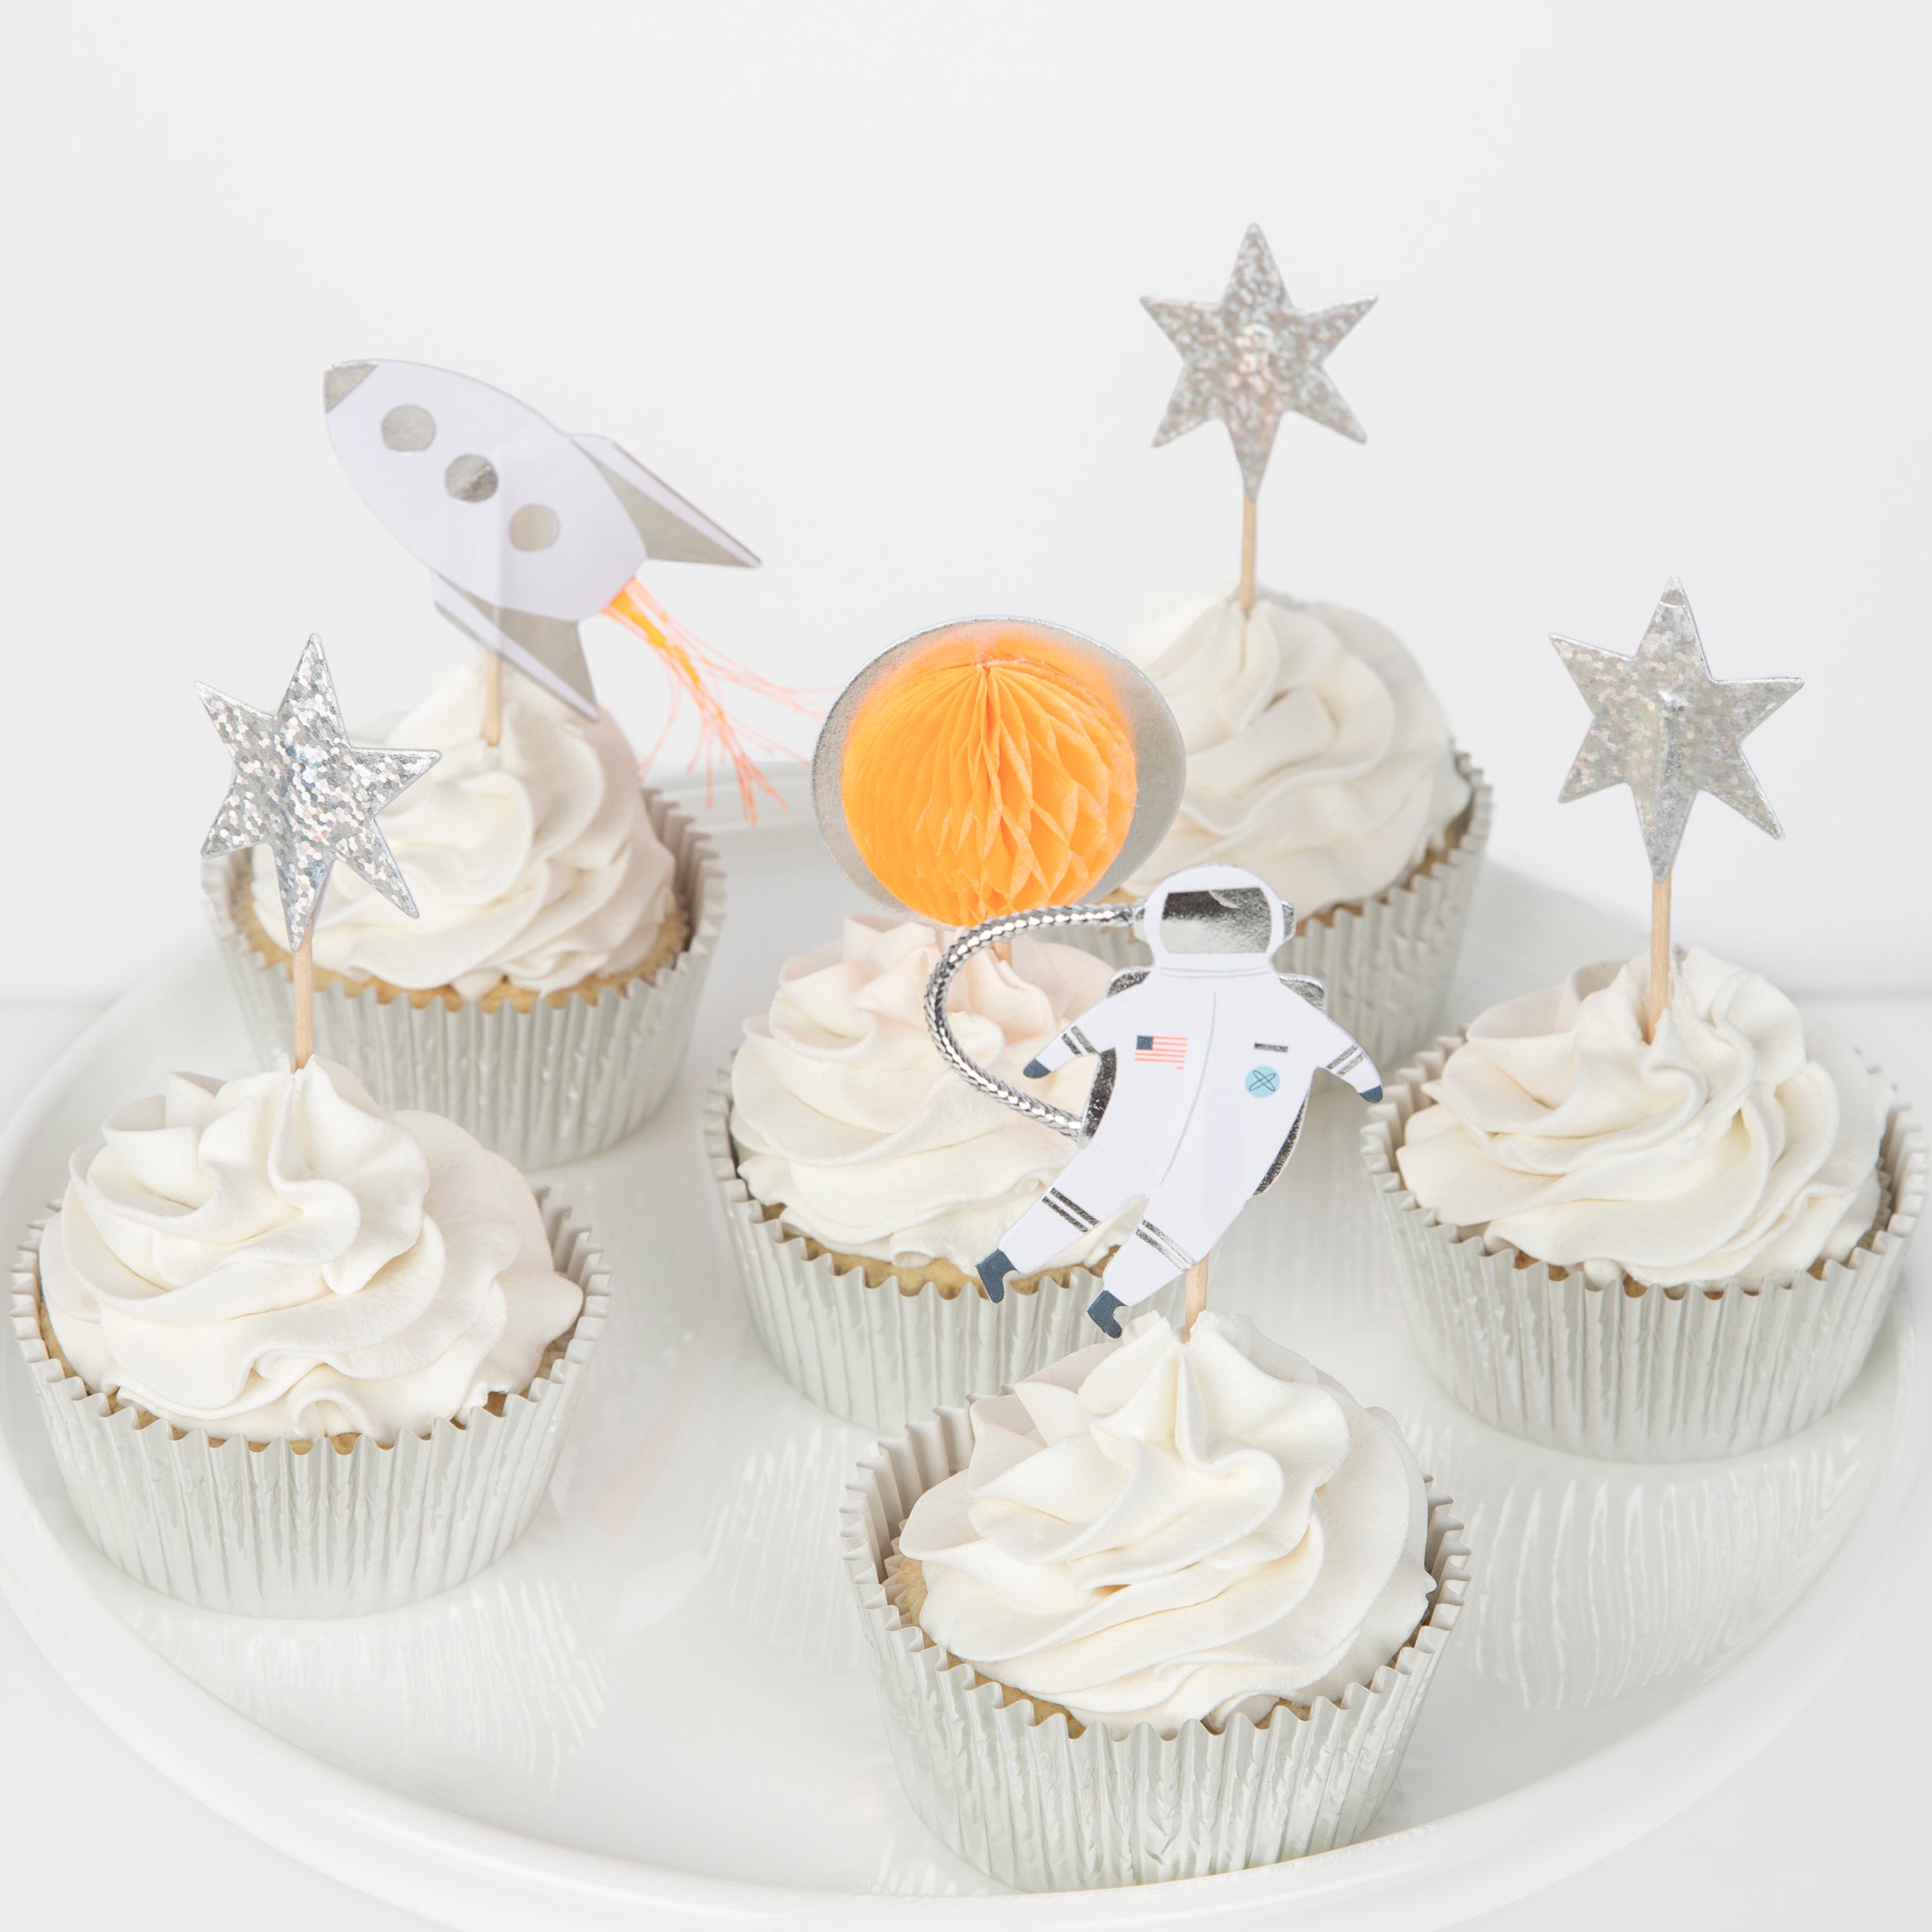 This special cupcake set features 24 cake toppers and 24 cupcake cases perfect for a space party.